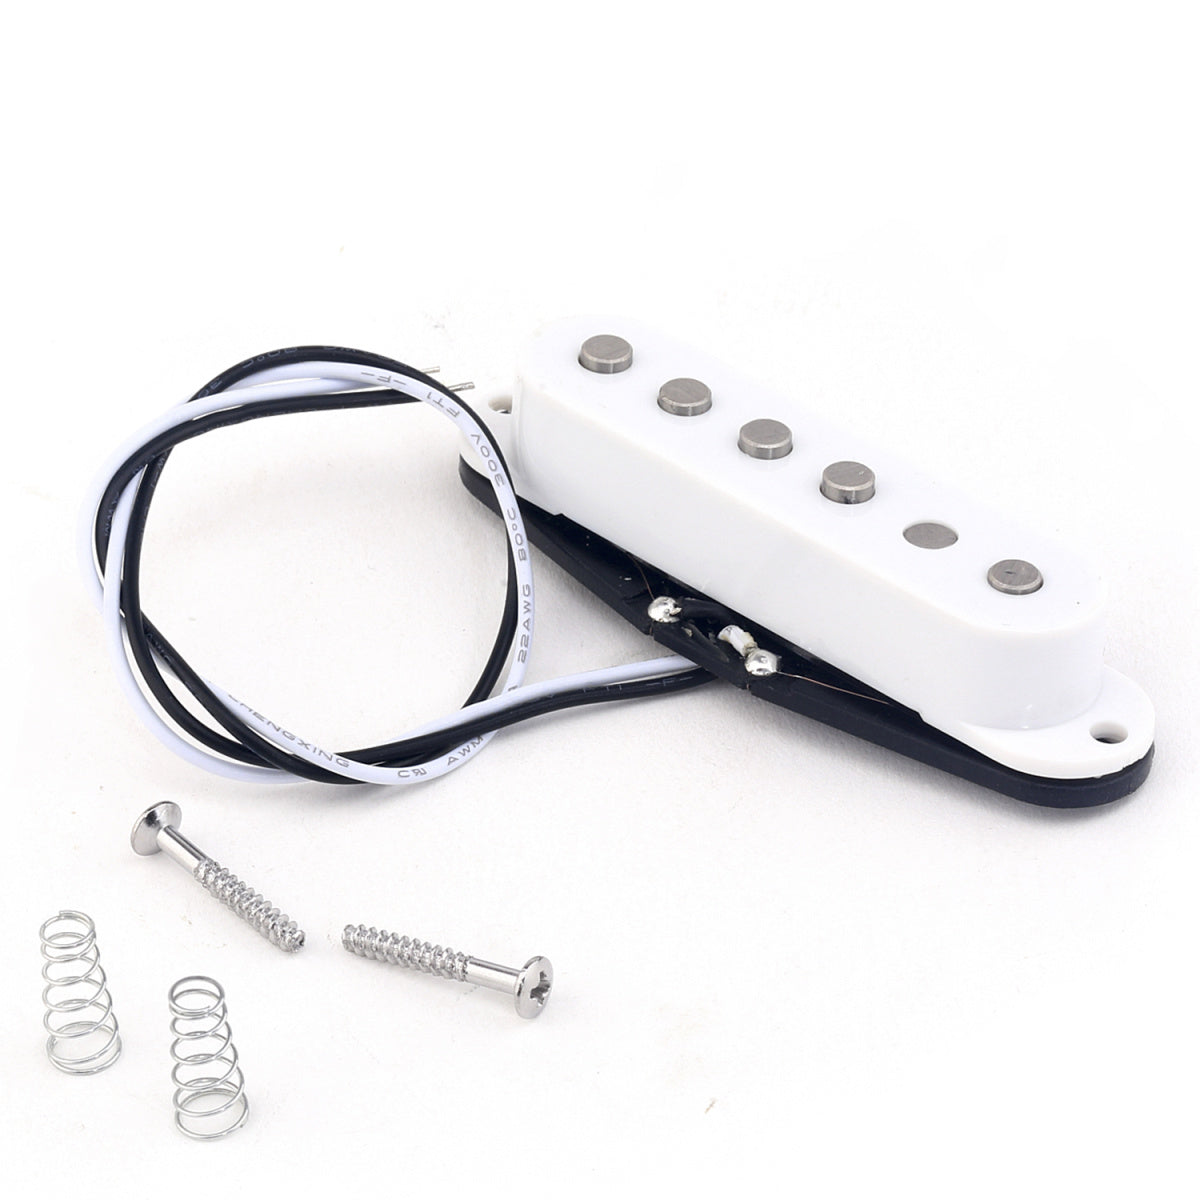 Musiclily Pro 50mm Alnico 5 Staggered Single Coil Pickup for Strat Style Guitar Bridge, Colorful Covers